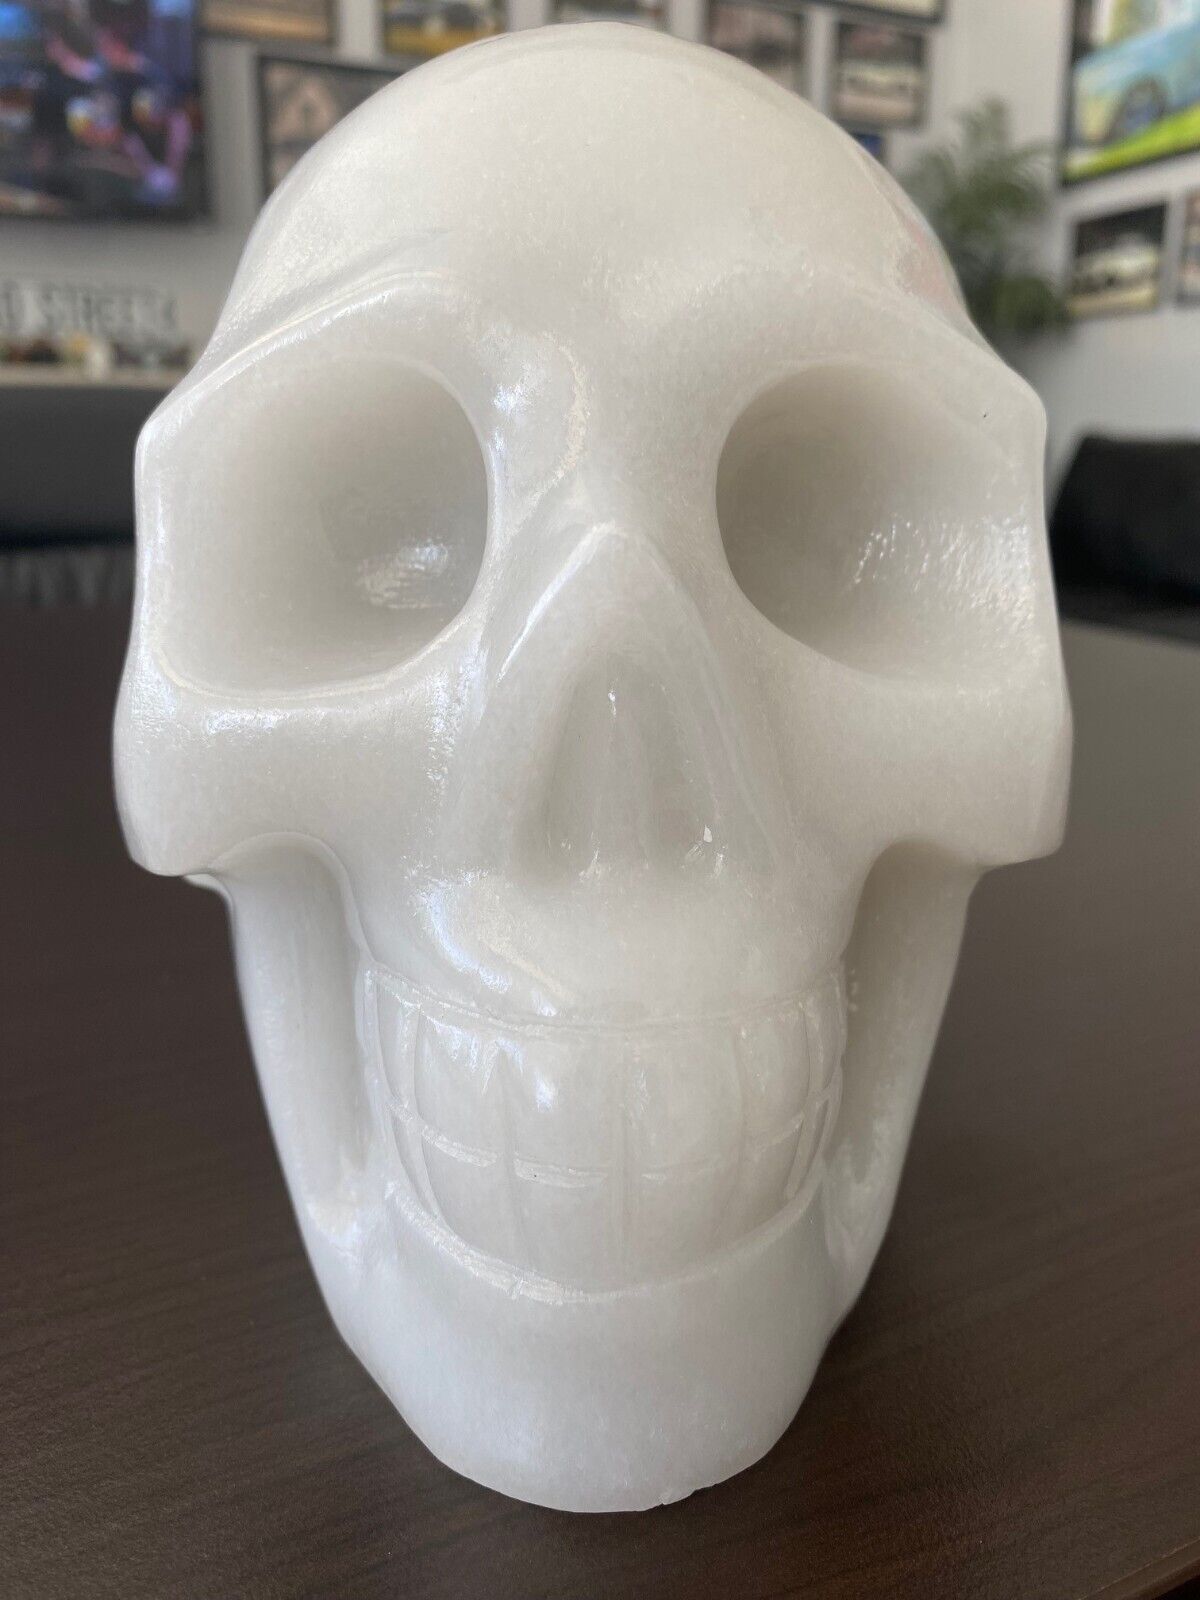 US SELLER LARGE OVER 10 LBS Hand Carved WHITE JADE Crystal Skull 7 X 5 X 6.125